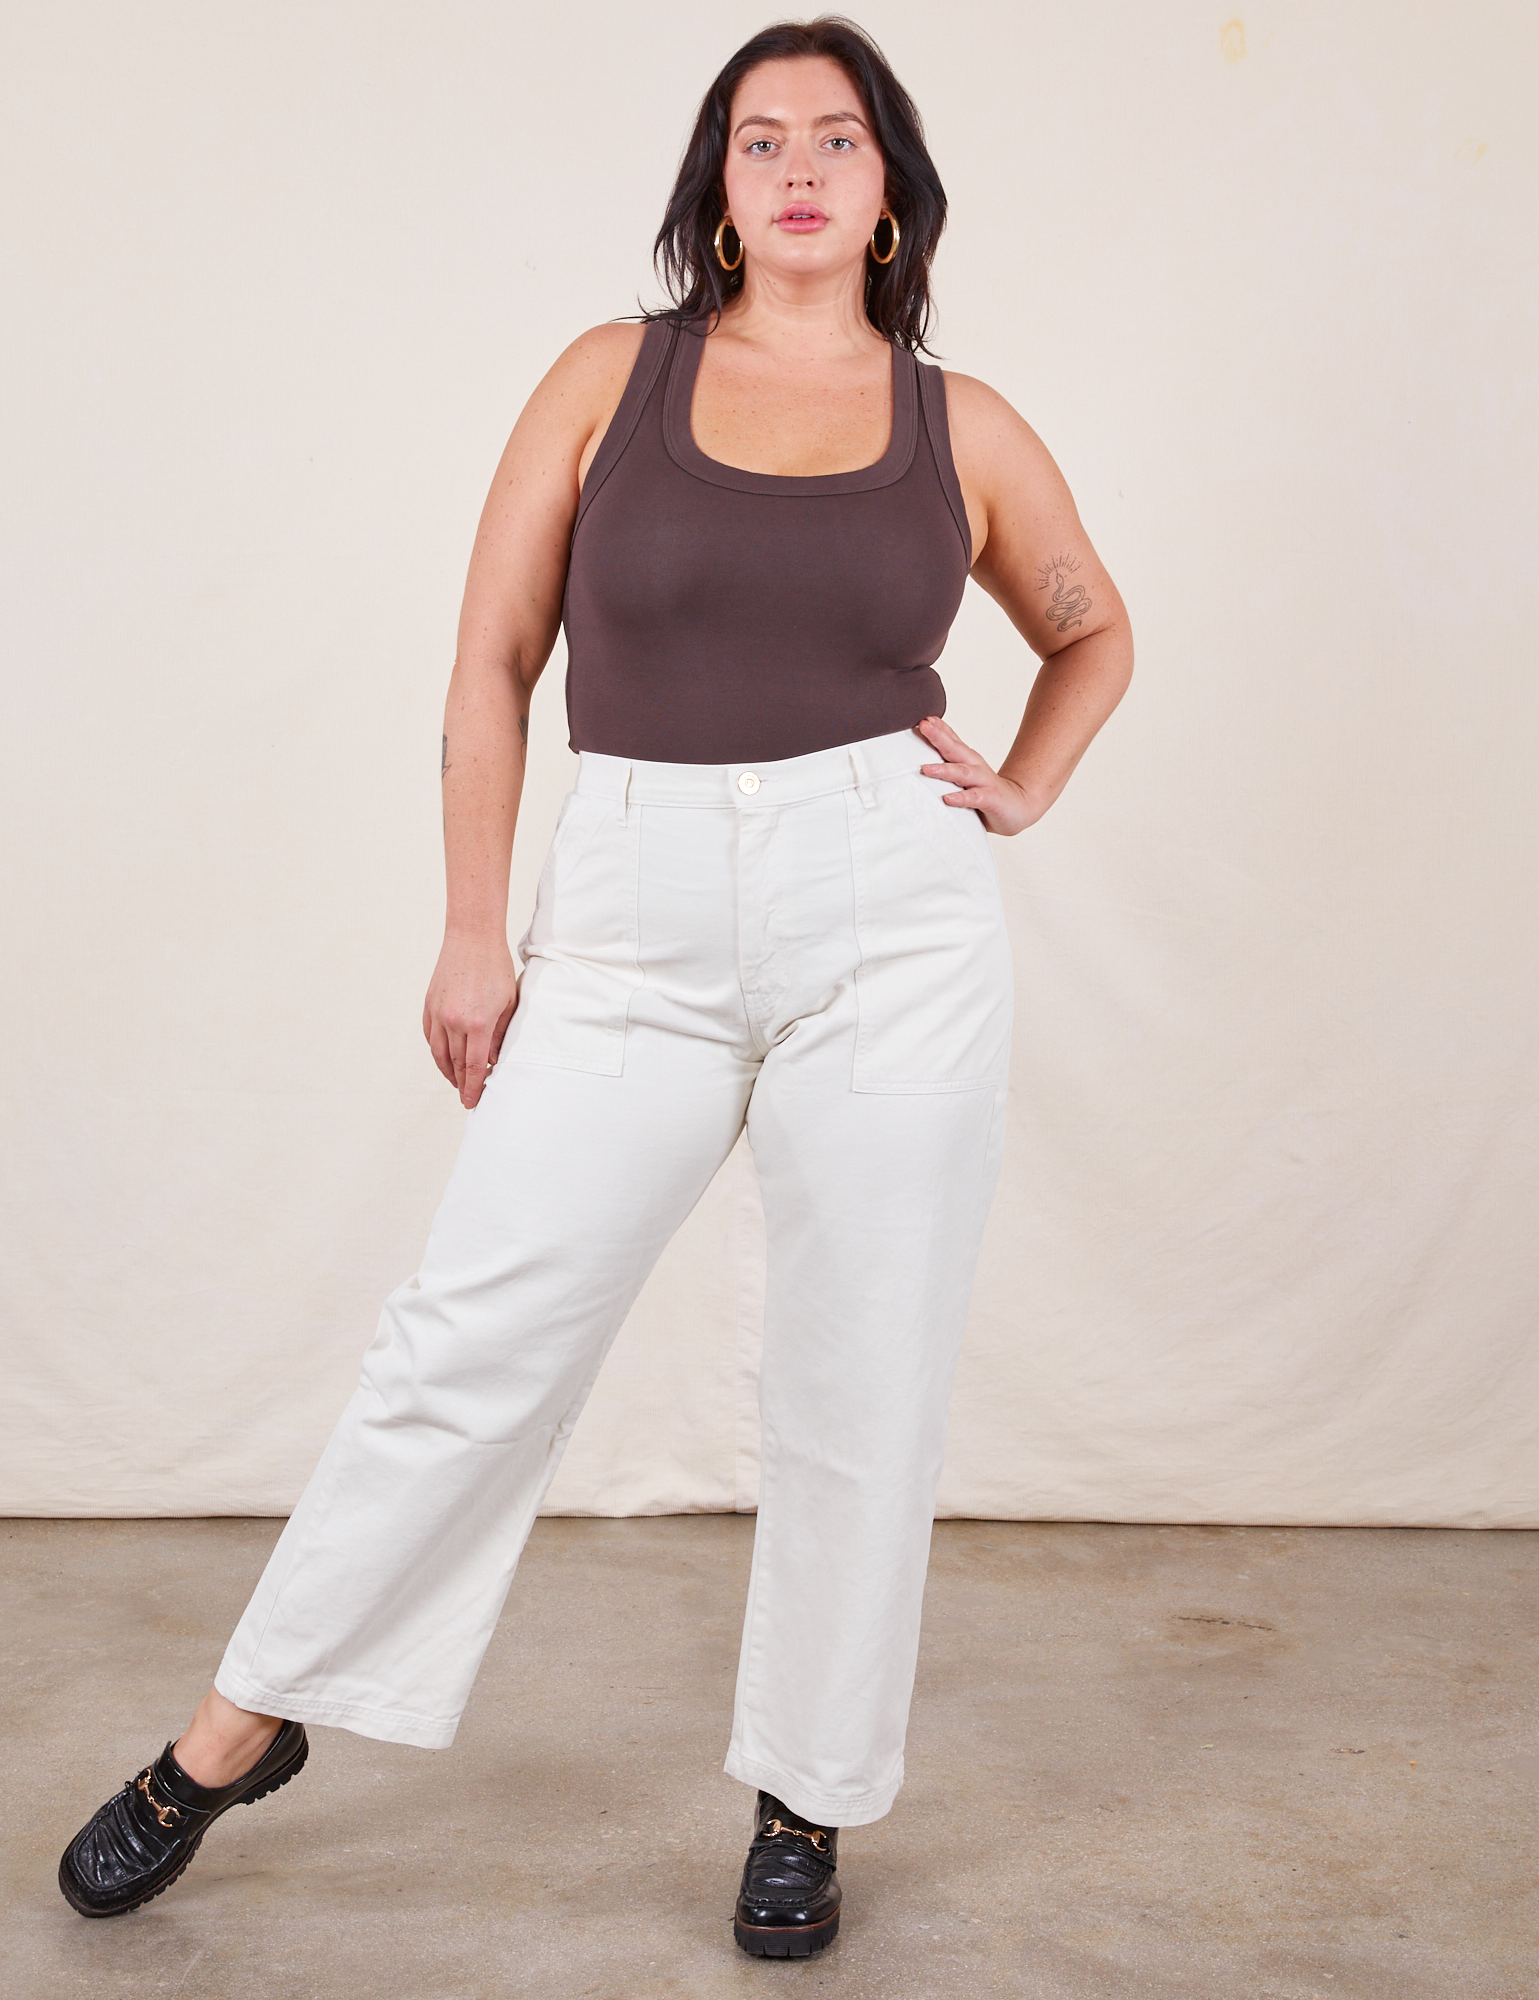 Faye is 5&#39;7&quot; and wearing L Work Pants in Vintage Tee Off-White paired with espresso brown Tank Top